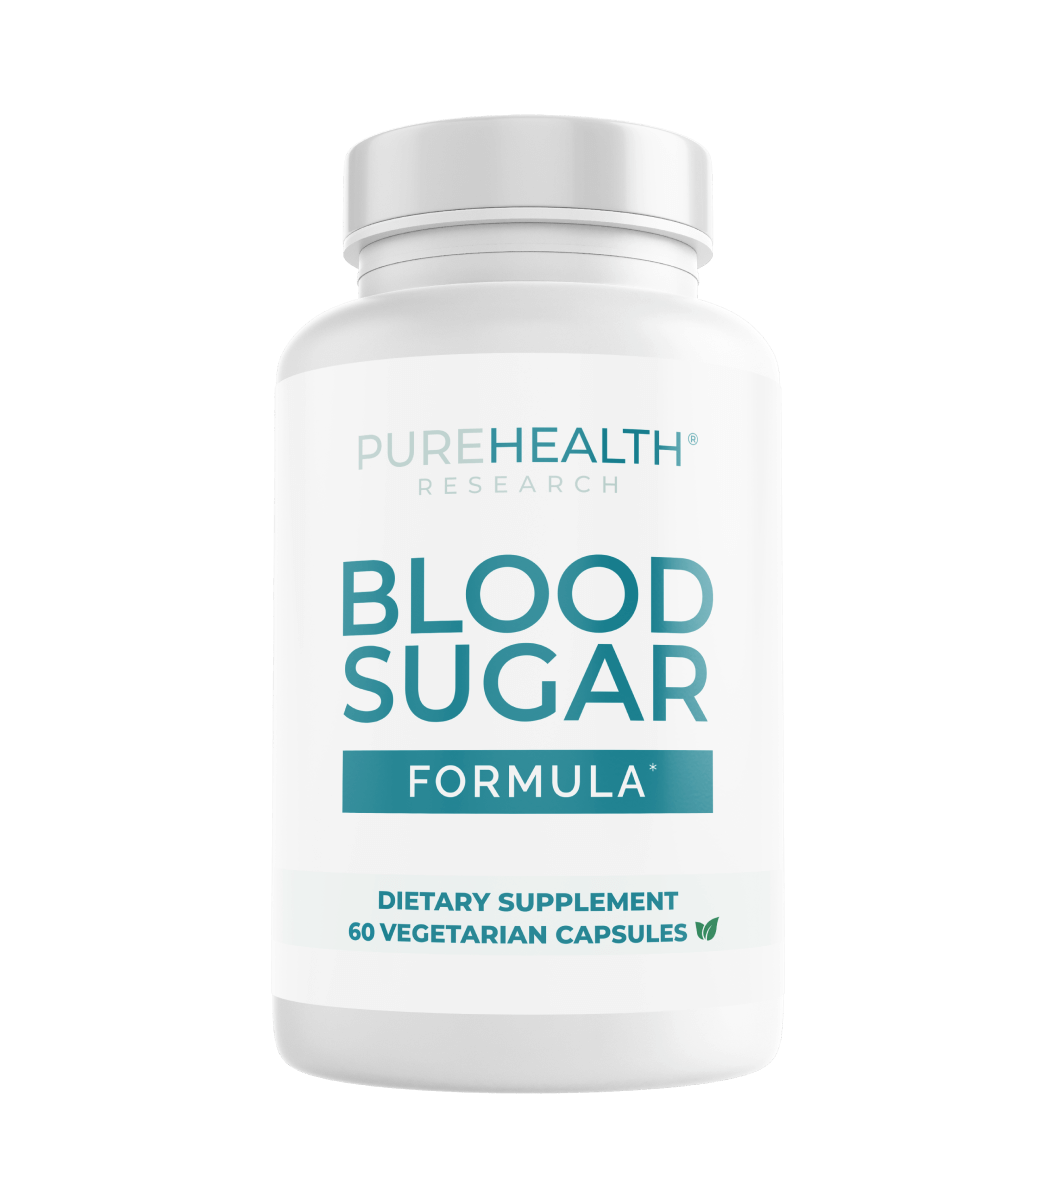 BLOOD SUGAR FORMULA by Pure Health Research